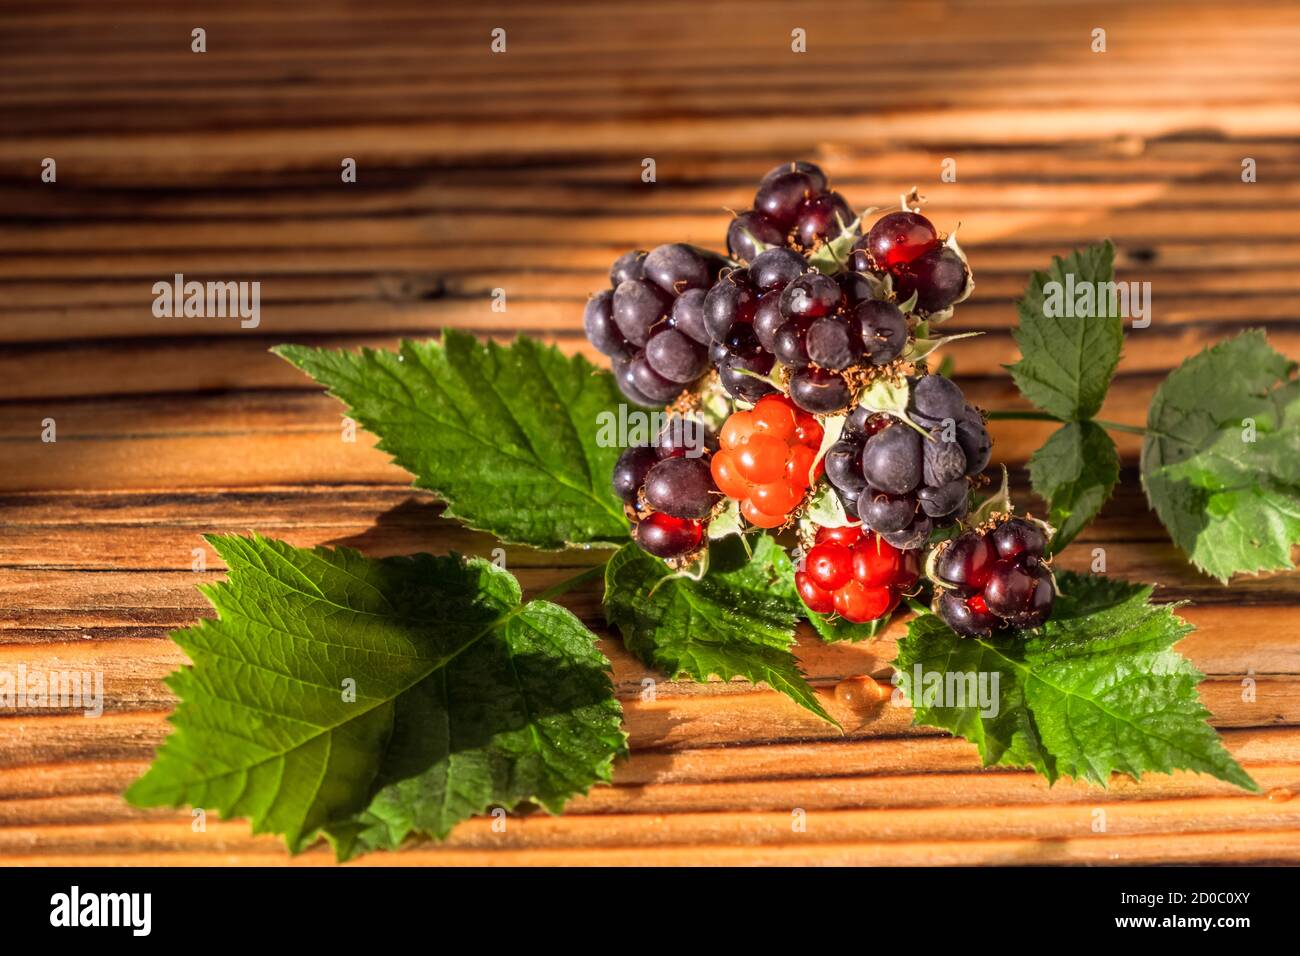 Blackberry With Leaves  on the Wood Table Stock Photo